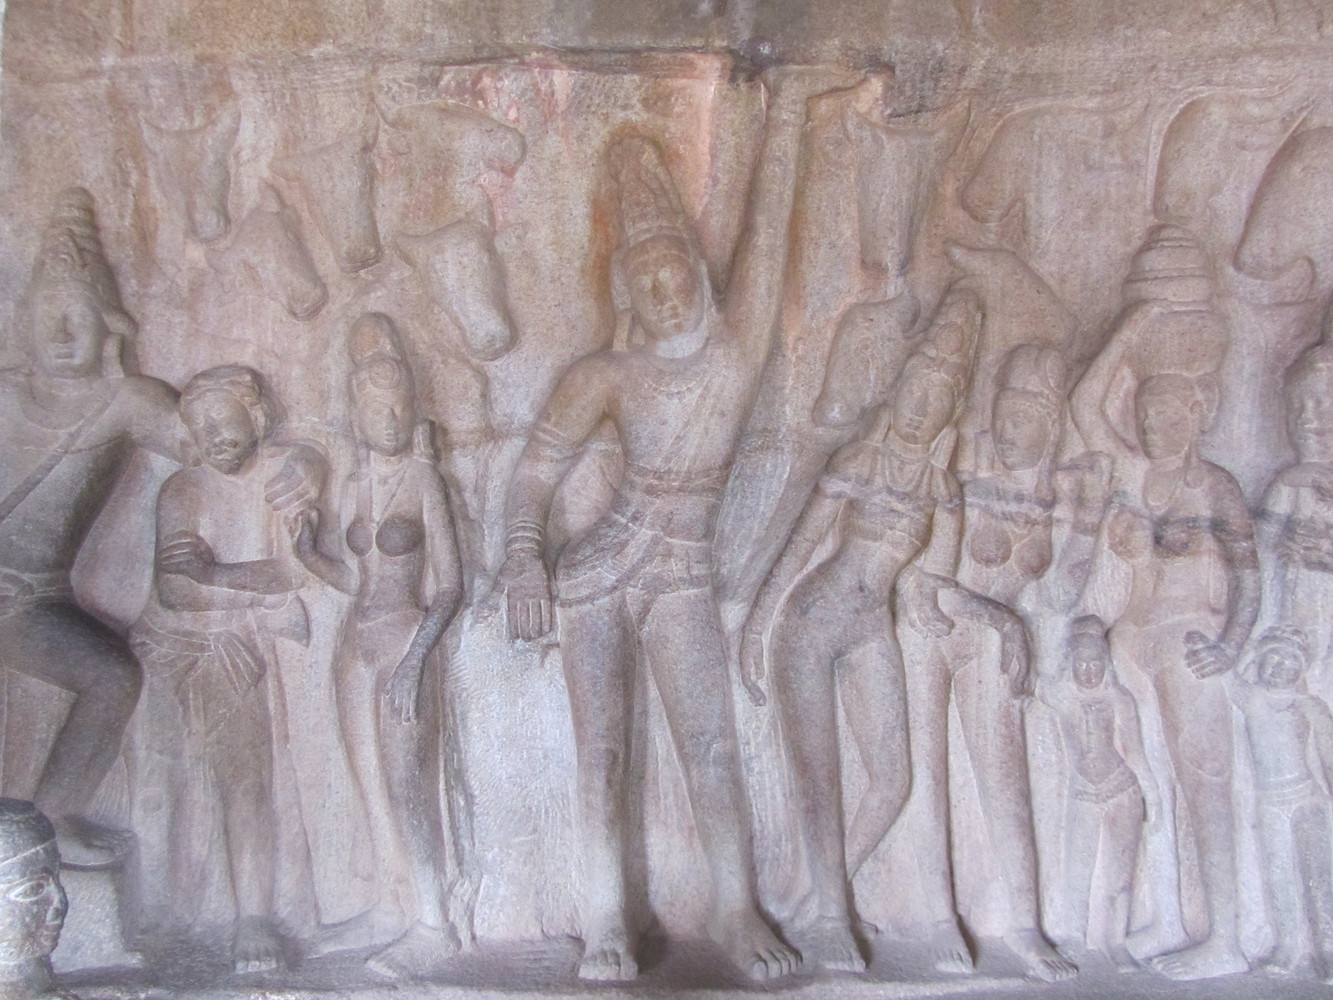 A relief on a rock face of Krishna Cave Temple depicting Krishna lifting the mythical Govardhana Hill